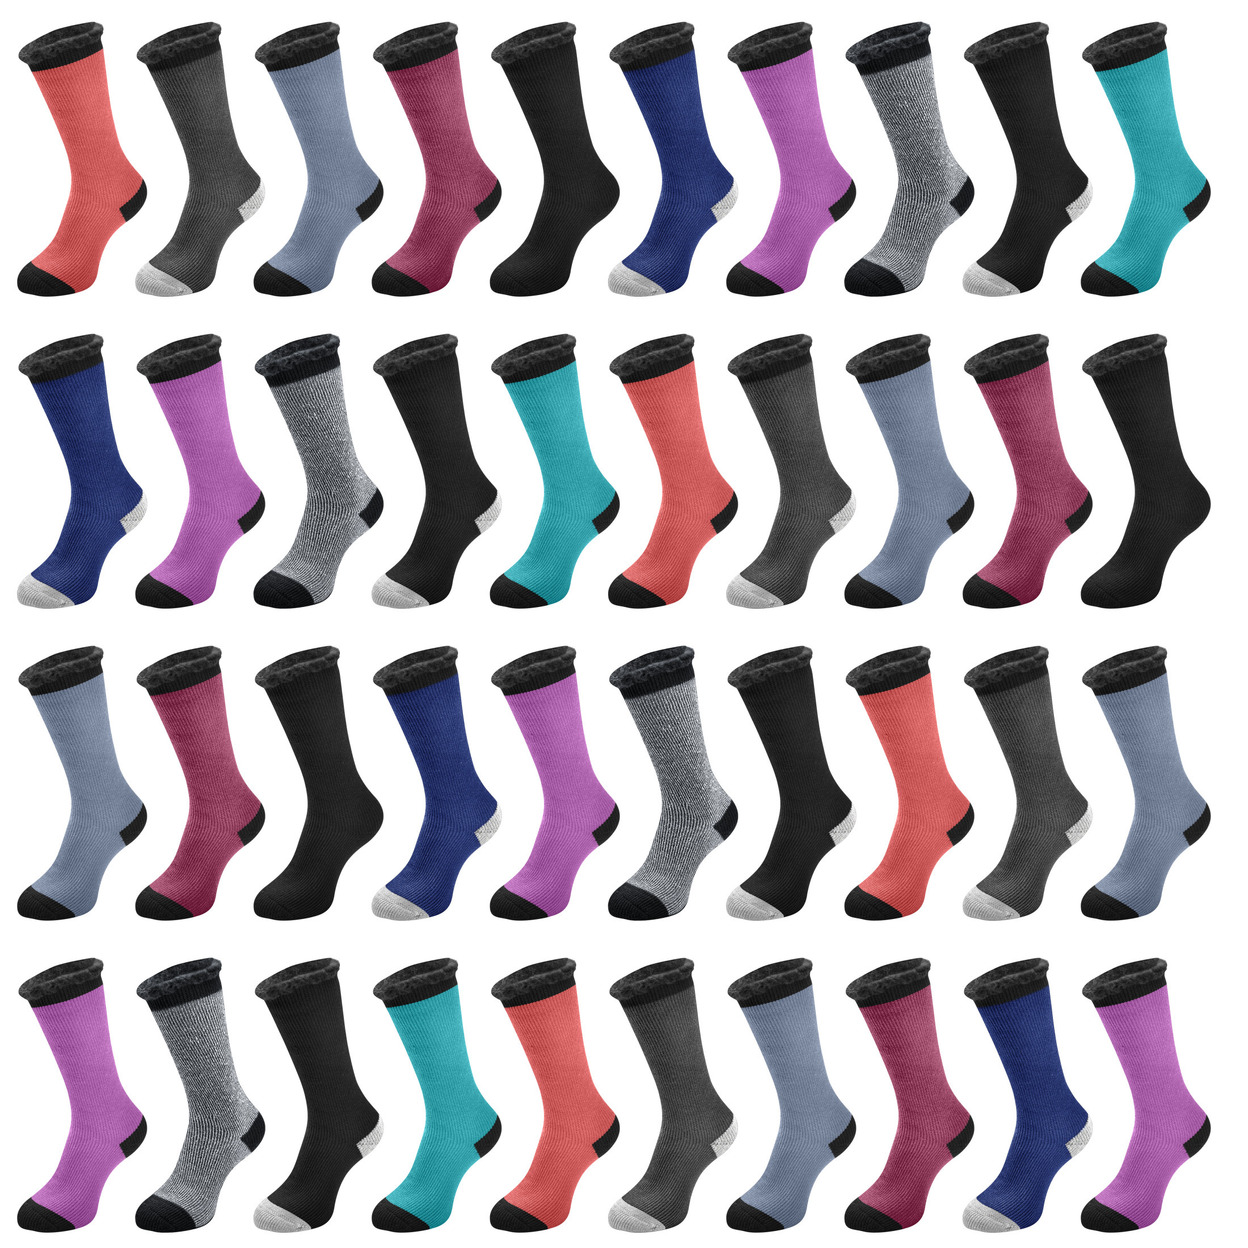 Multi-Pairs: Men's Thermal-Insulated Brushed Lined Warm Heated Winter Socks For Cold Weather - 5-pairs